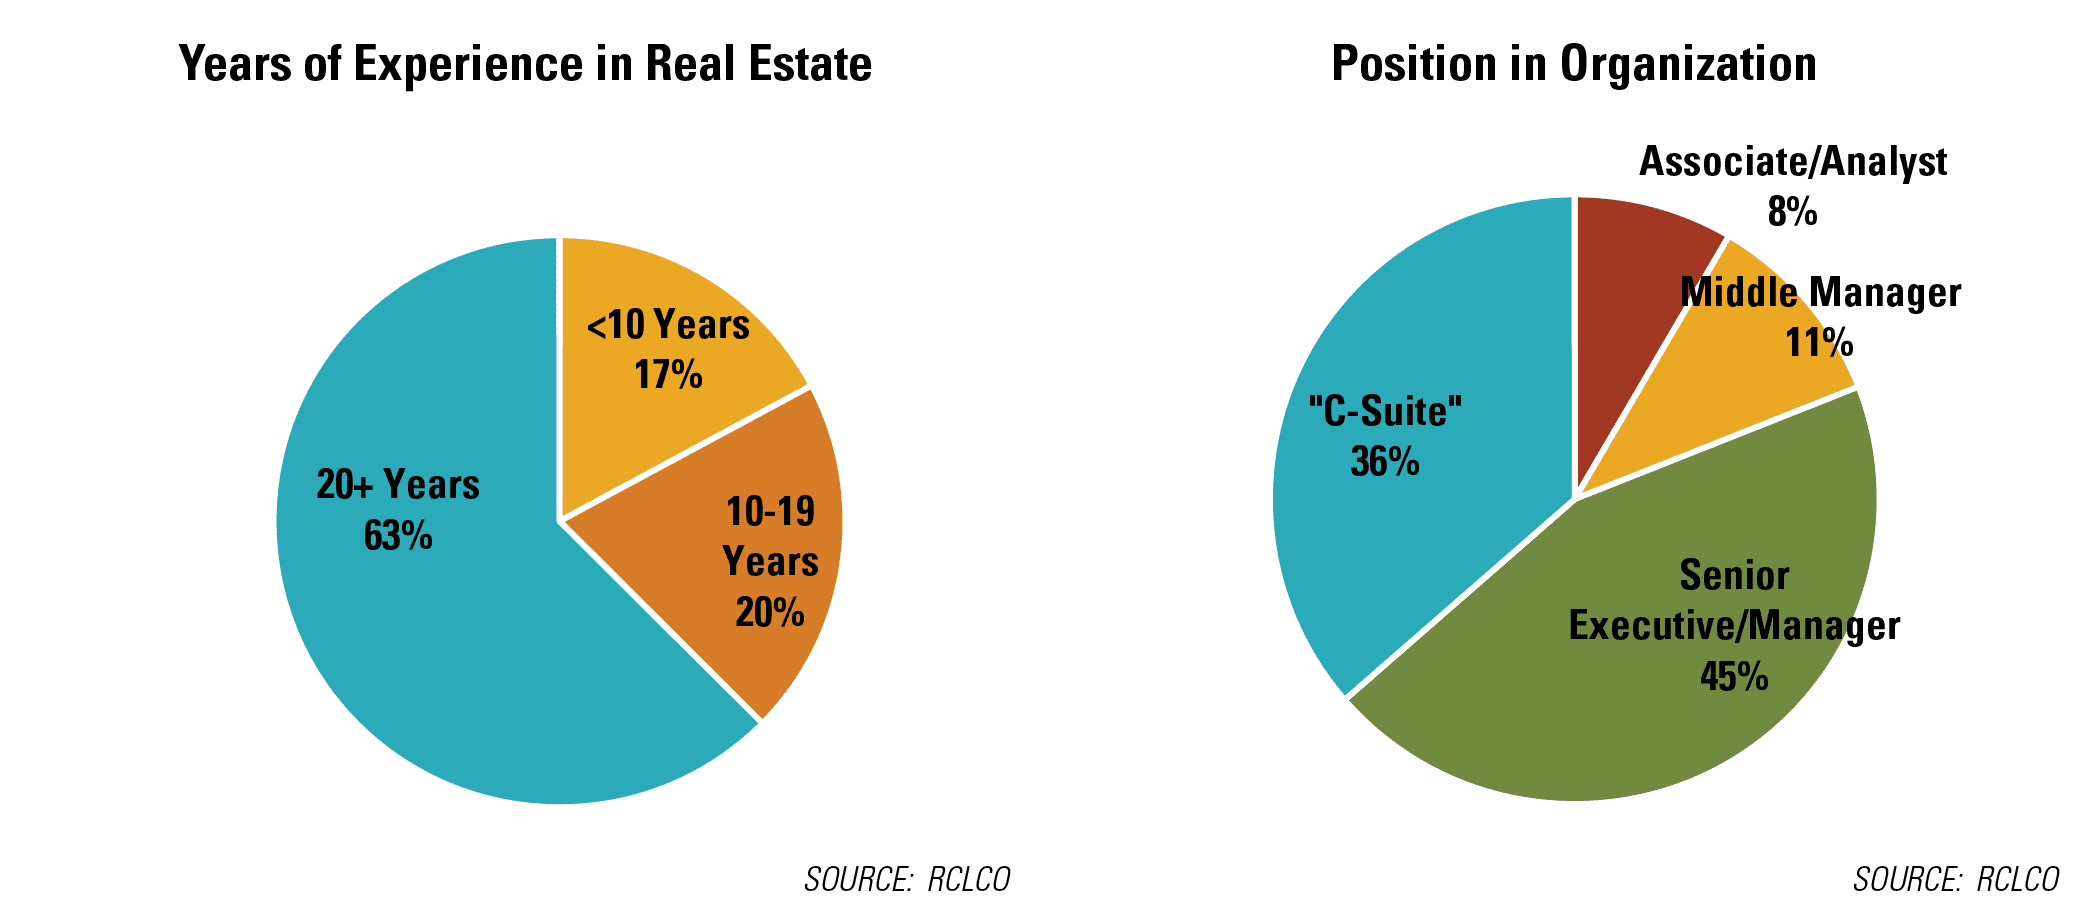 Years of Experience in Real Estate & Position in Organization